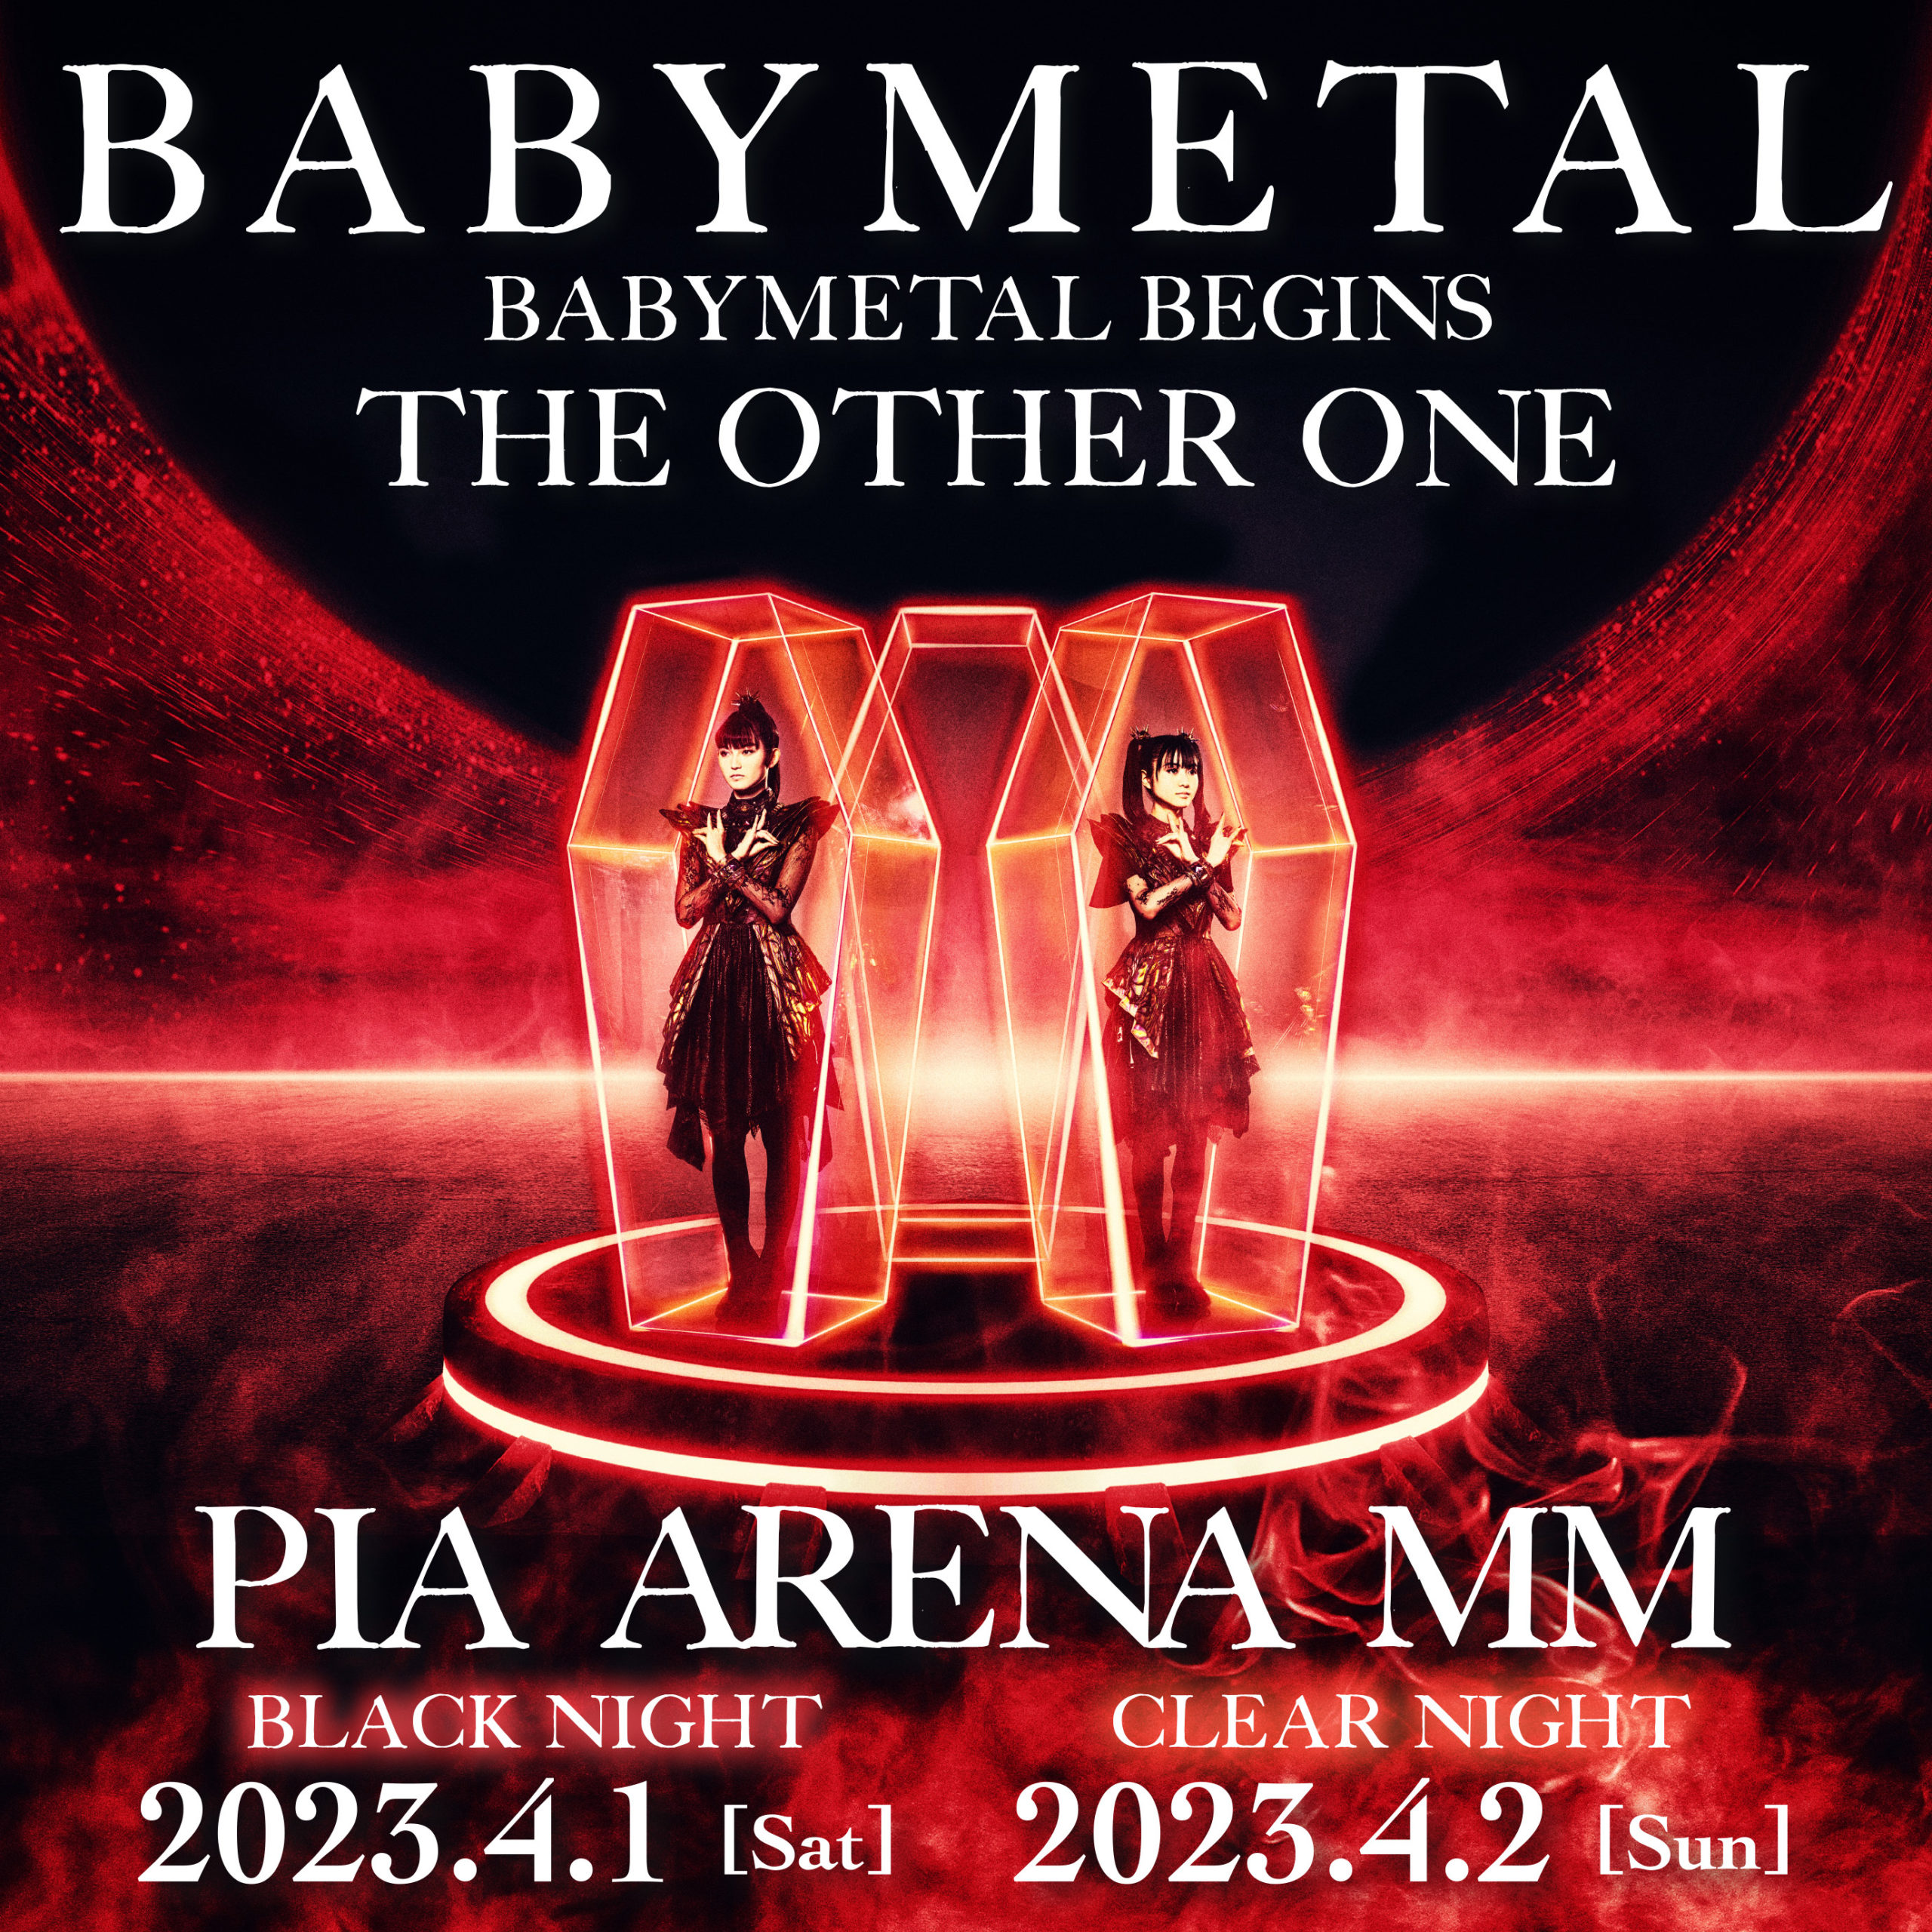 BABYMETAL BEGINS – THE OTHER ONE -“ Live Shows Announced For FOX 